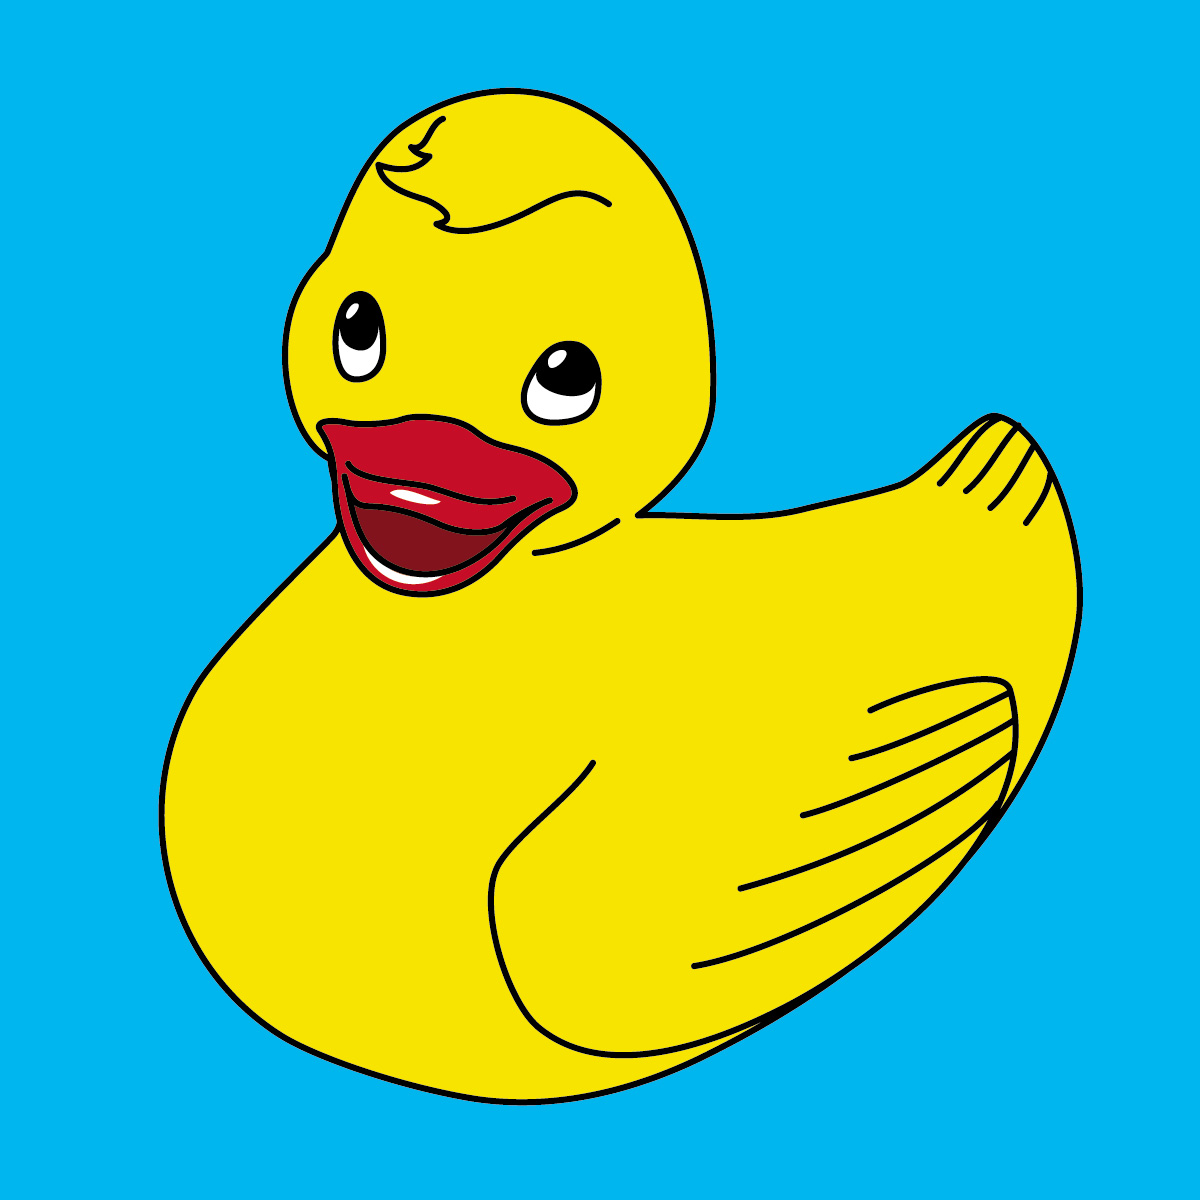 Free Animated Rubber Duckie Clipart - ClipArt Best